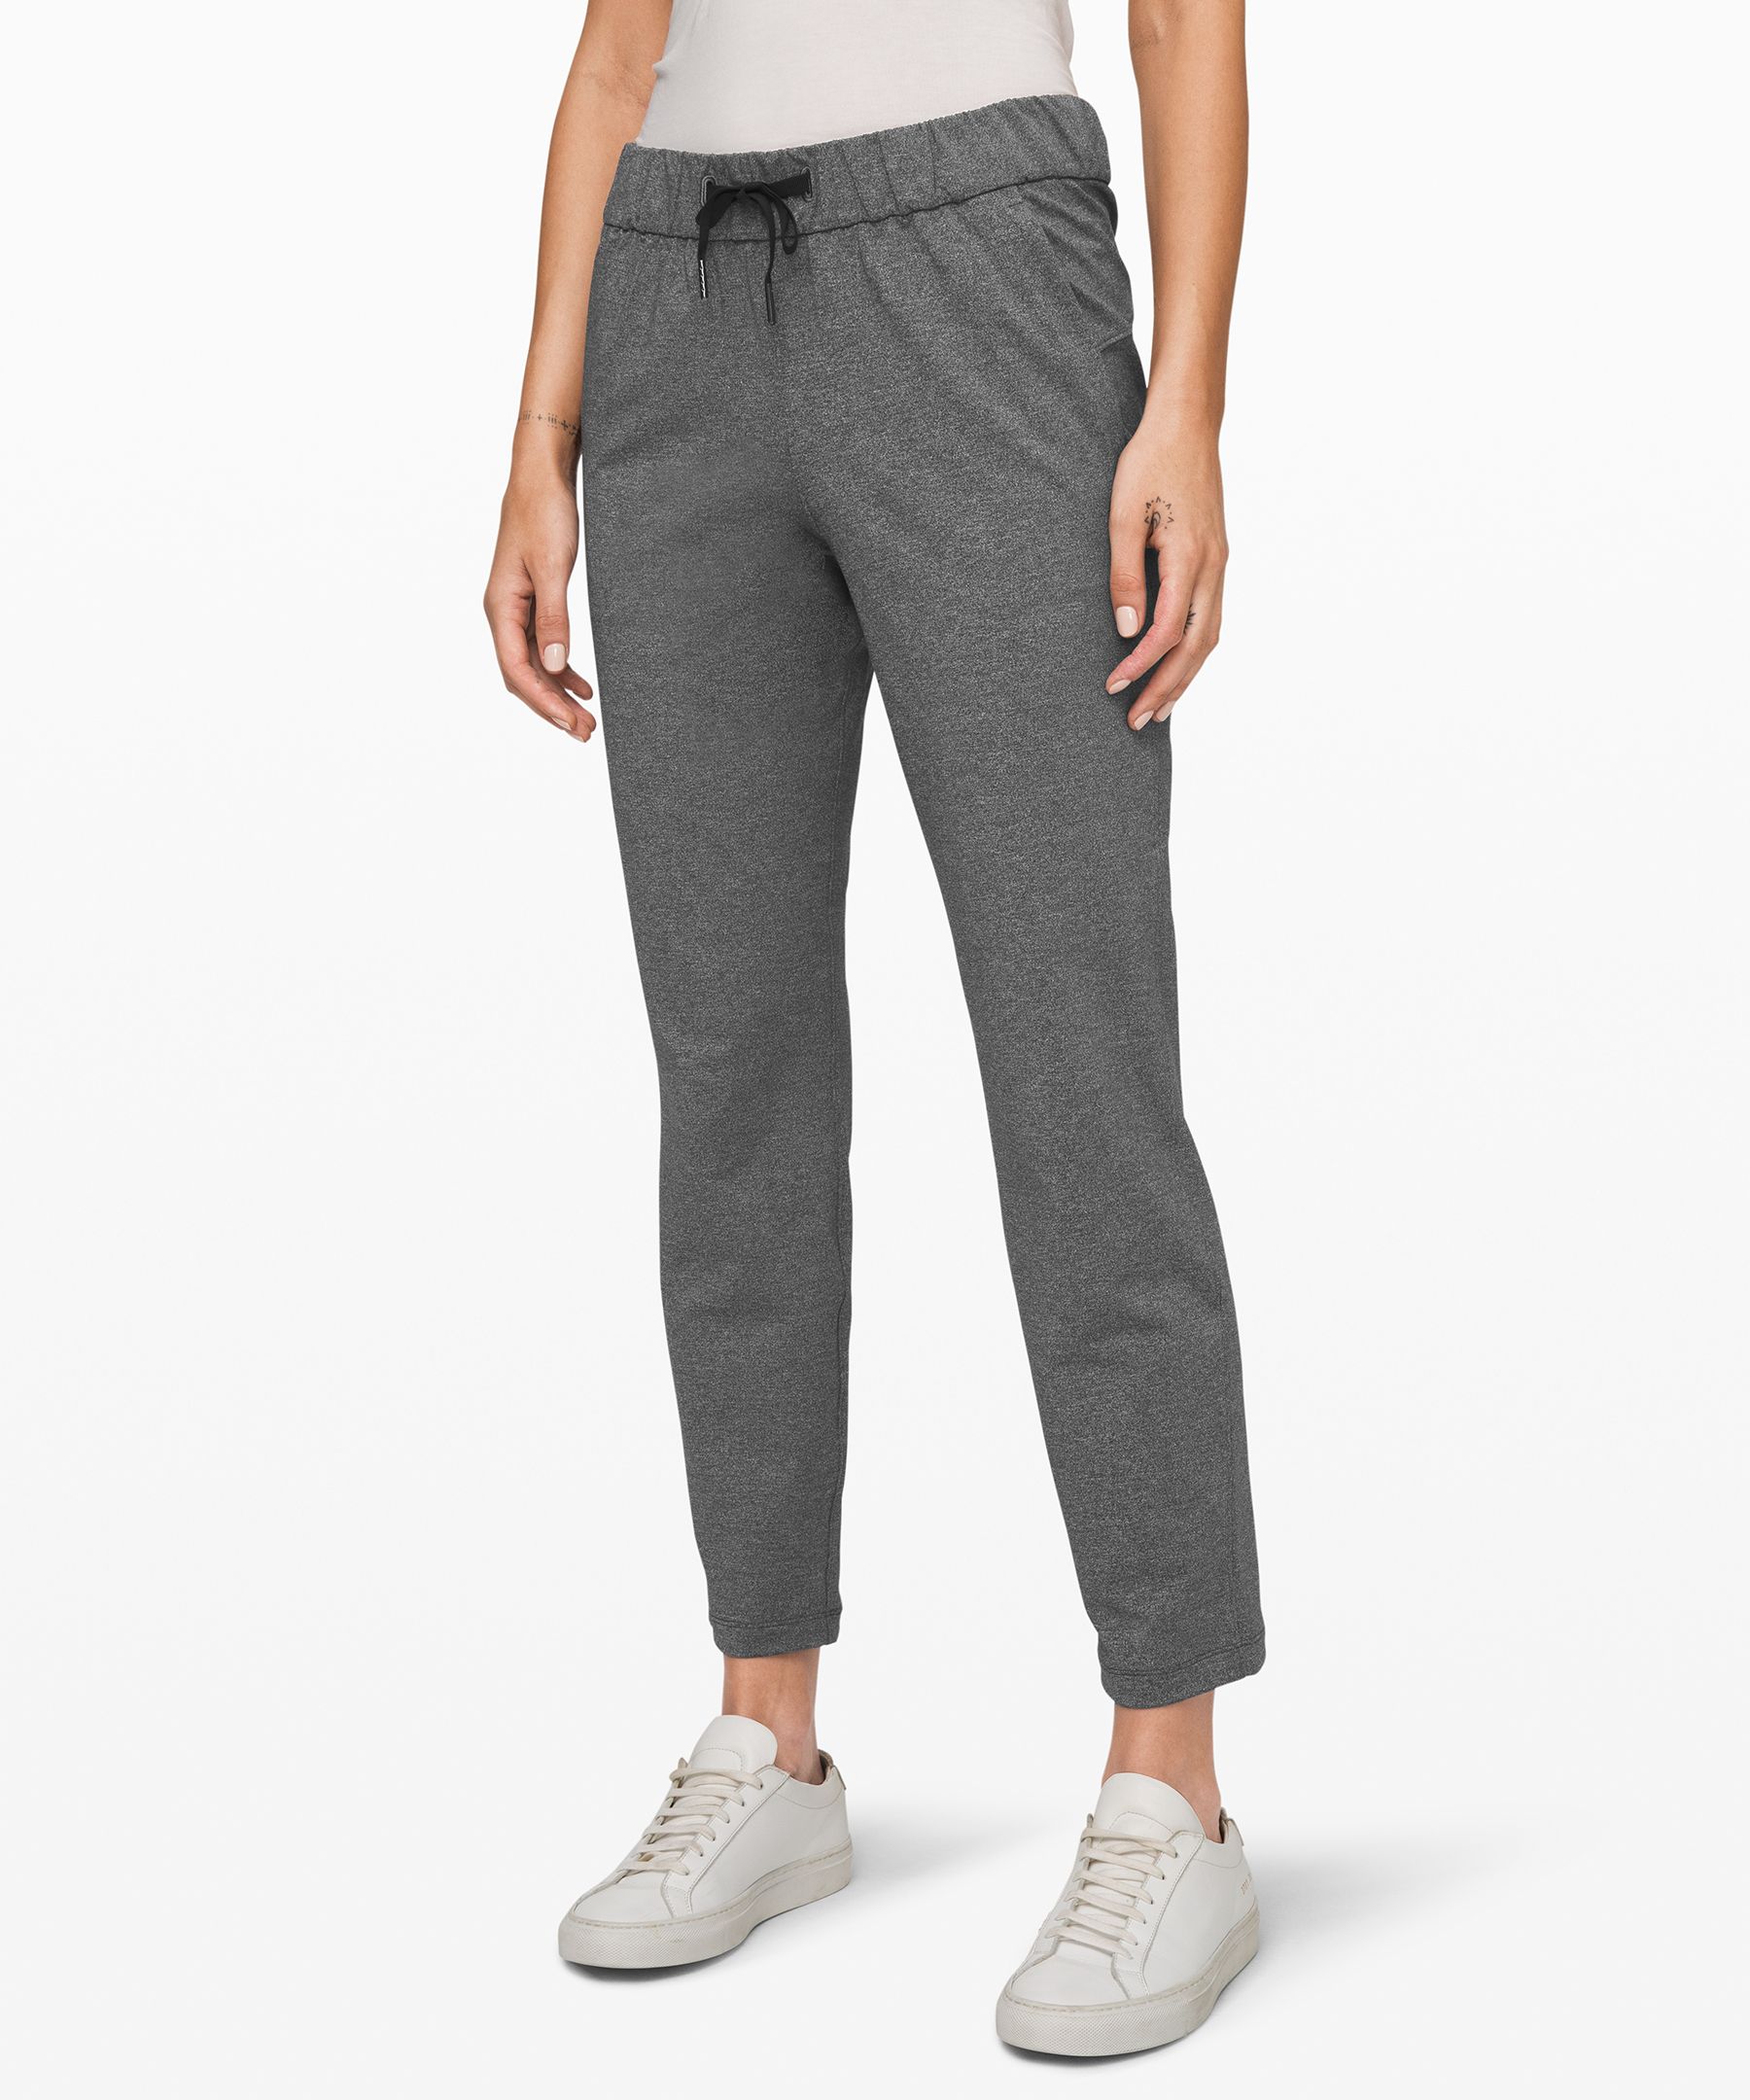 lululemon in the fly pant